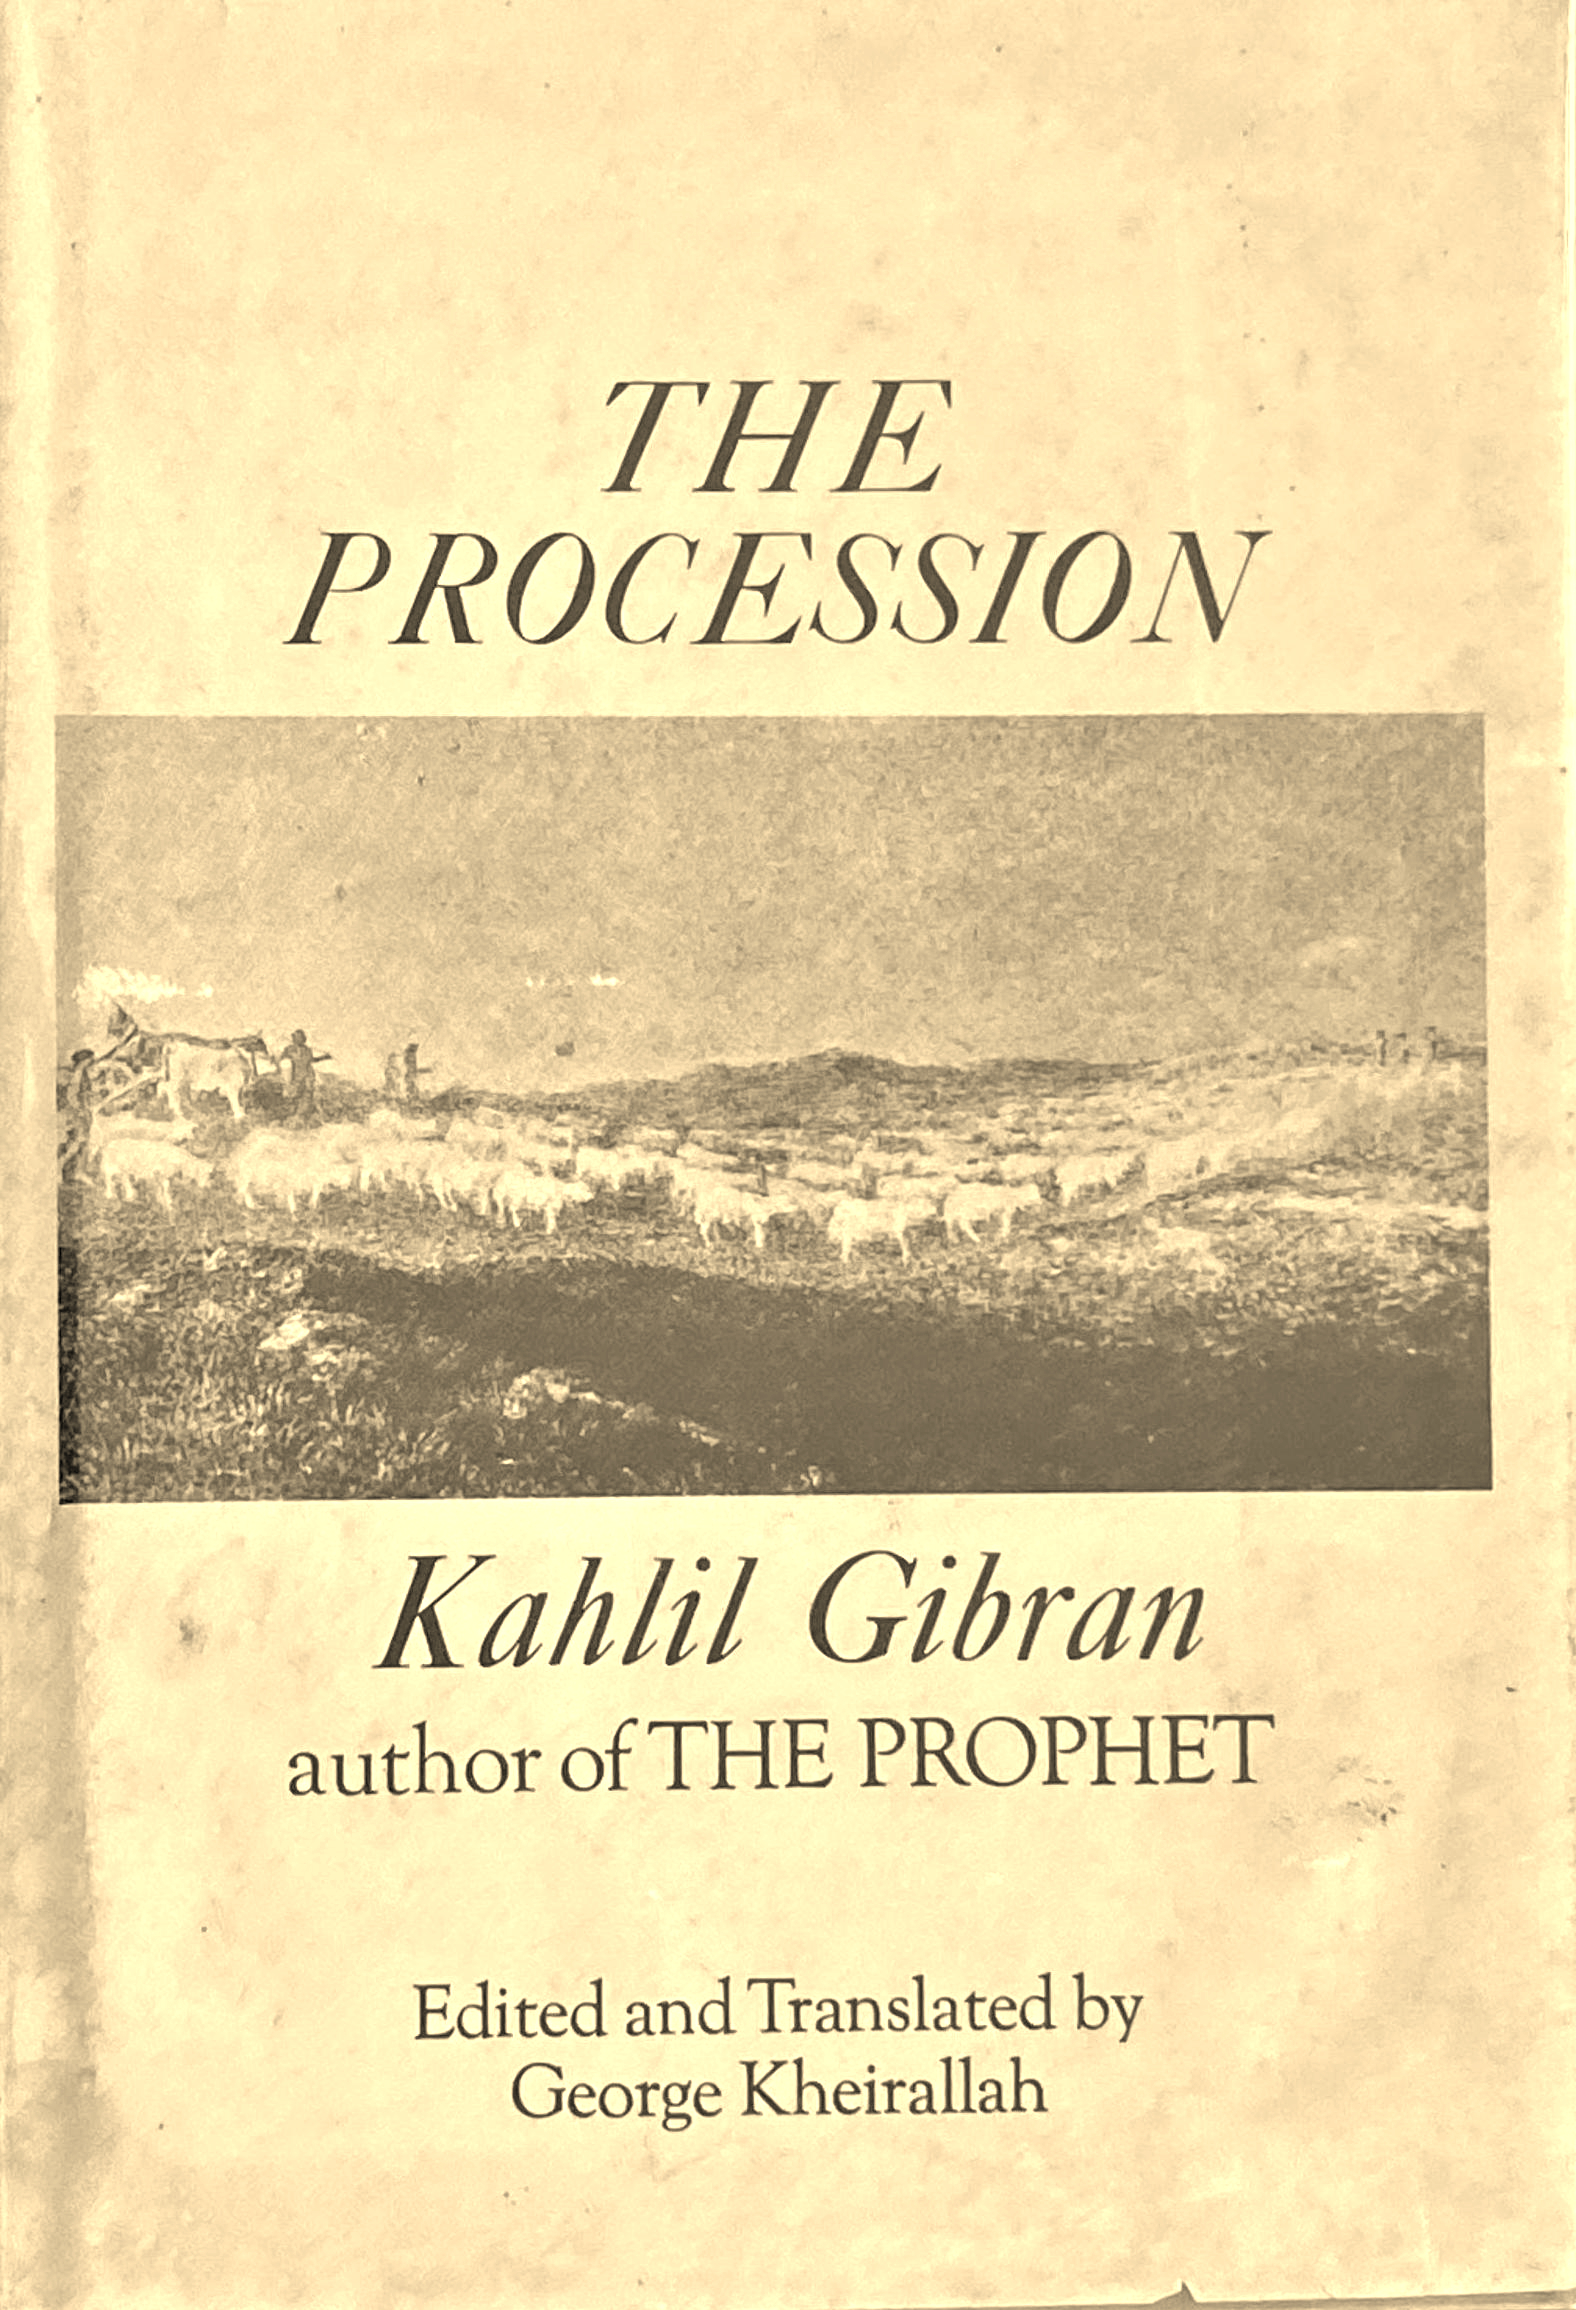 The Procession by G. Kheirallah, Philosophical Library, 1958